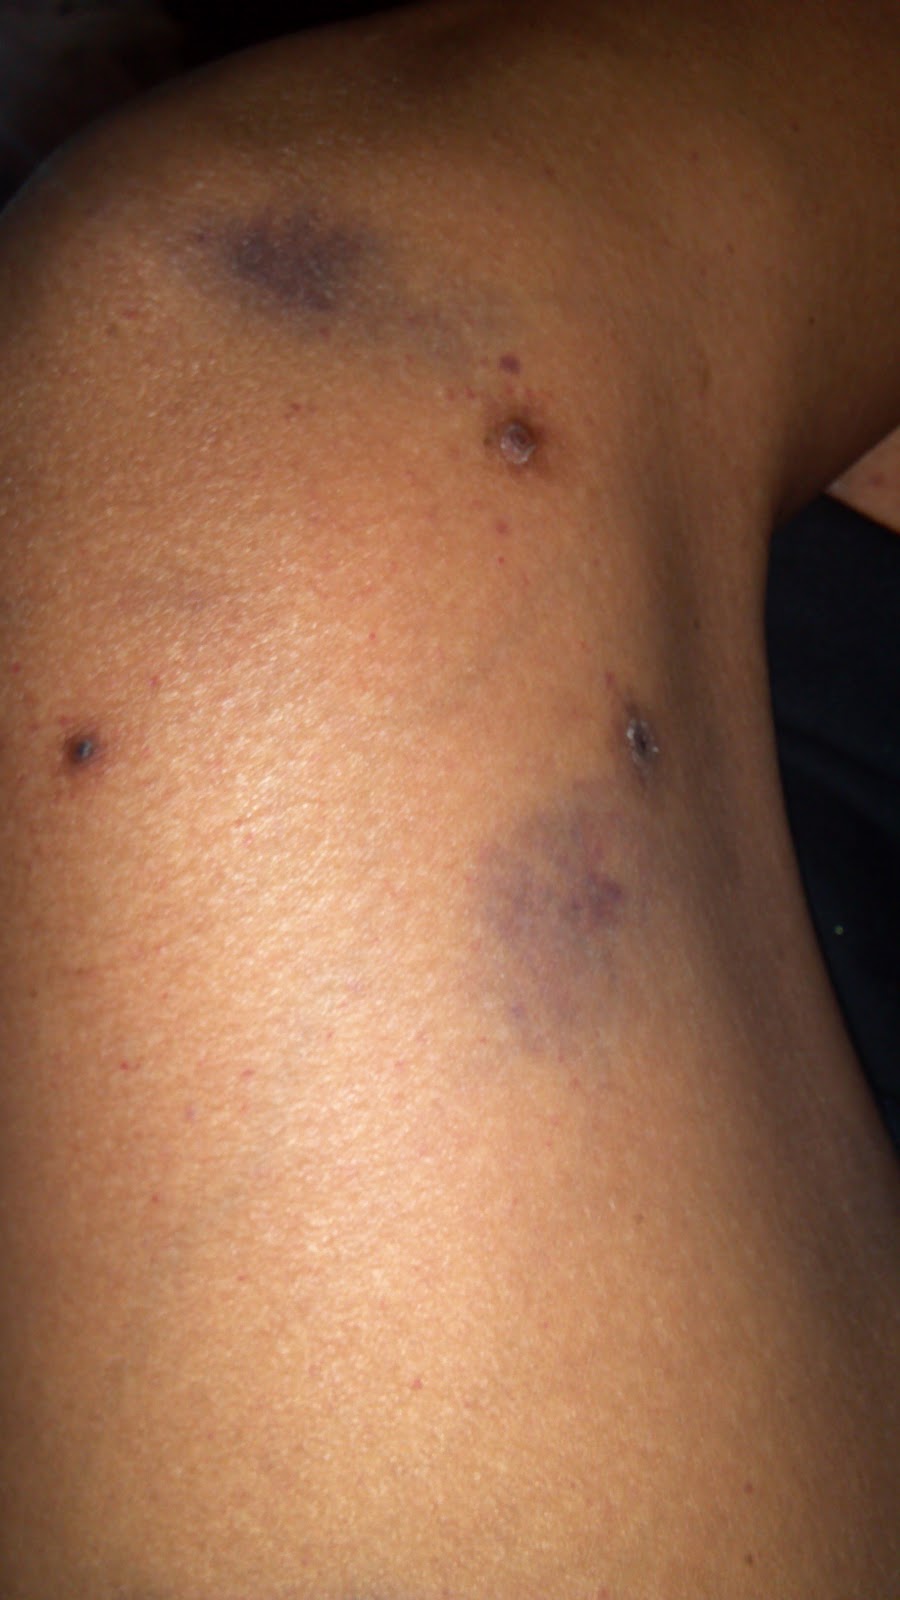 Bruises and Blood Spots Under the Skin | Michigan Medicine